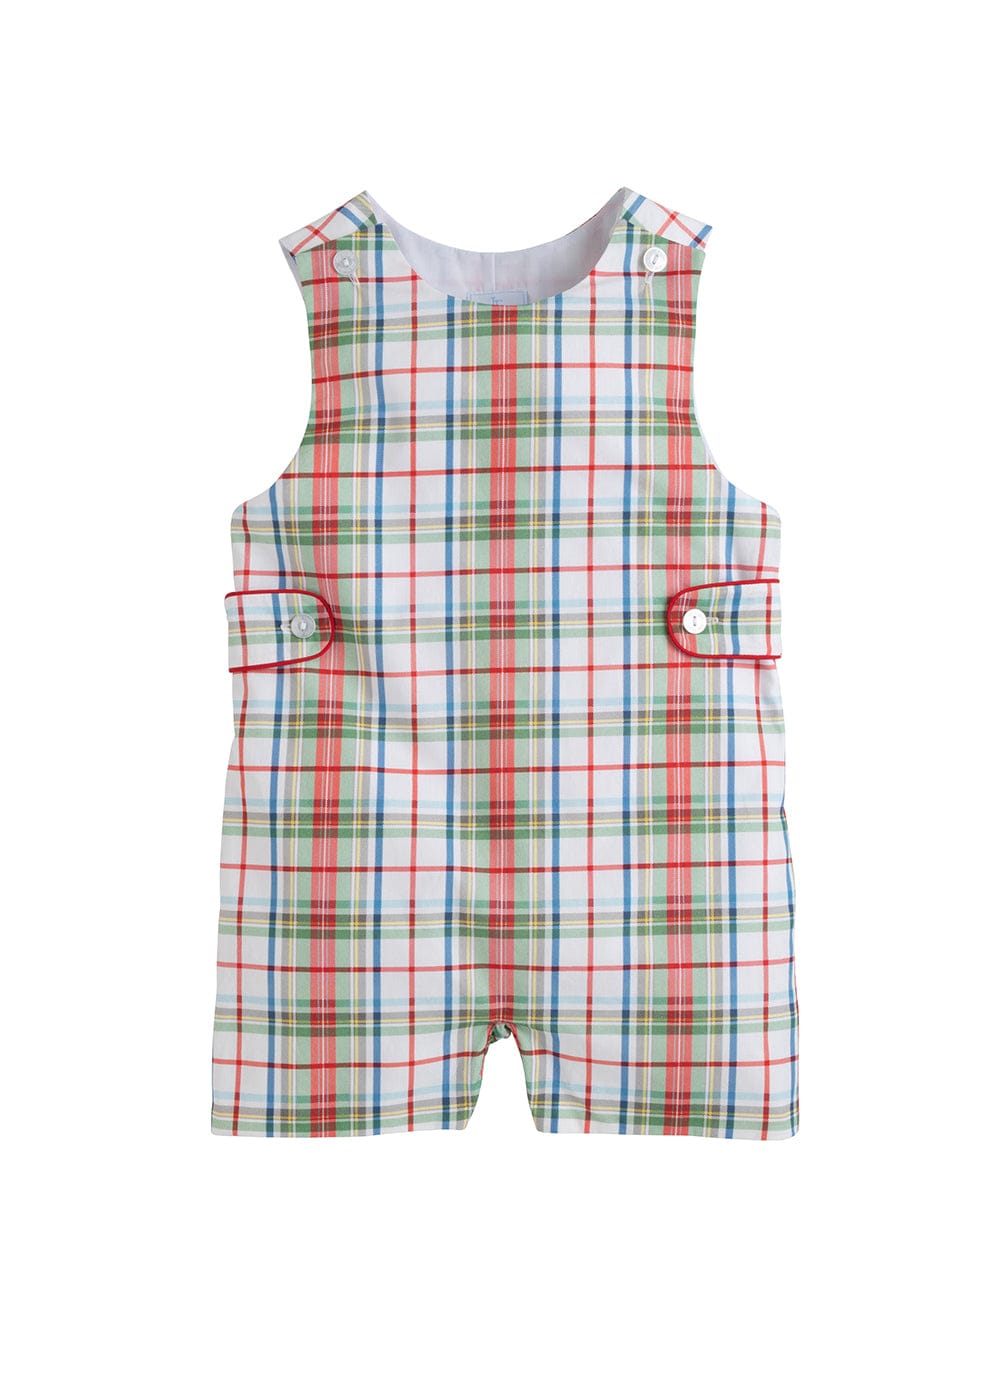 classic childrens clothing boys john john with button tabs in green and red plaid 